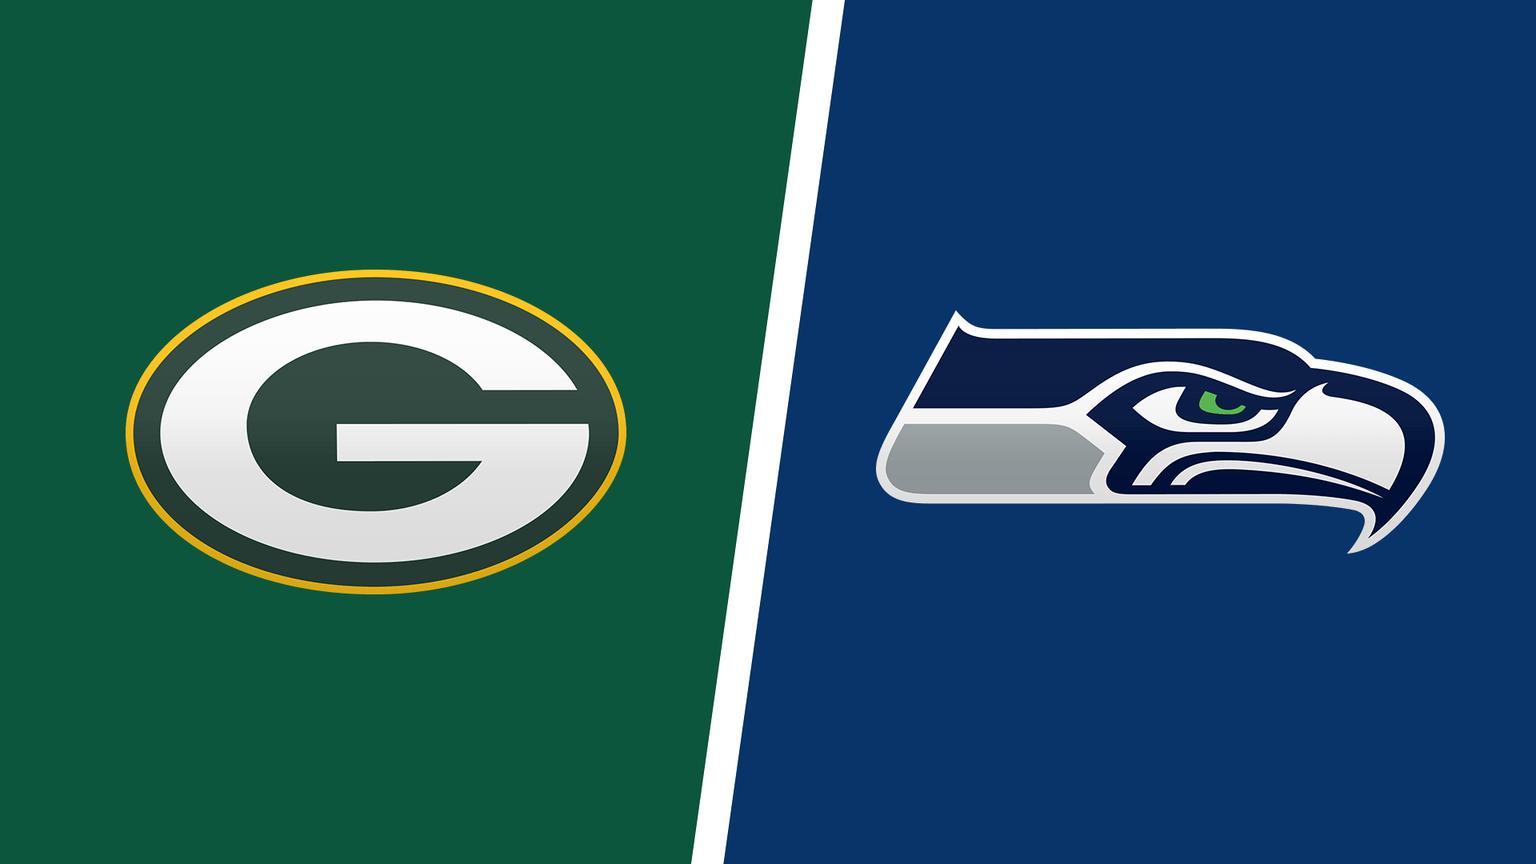 How to Watch Seattle Seahawks vs. Green Bay Packers Week 10 NFL Game